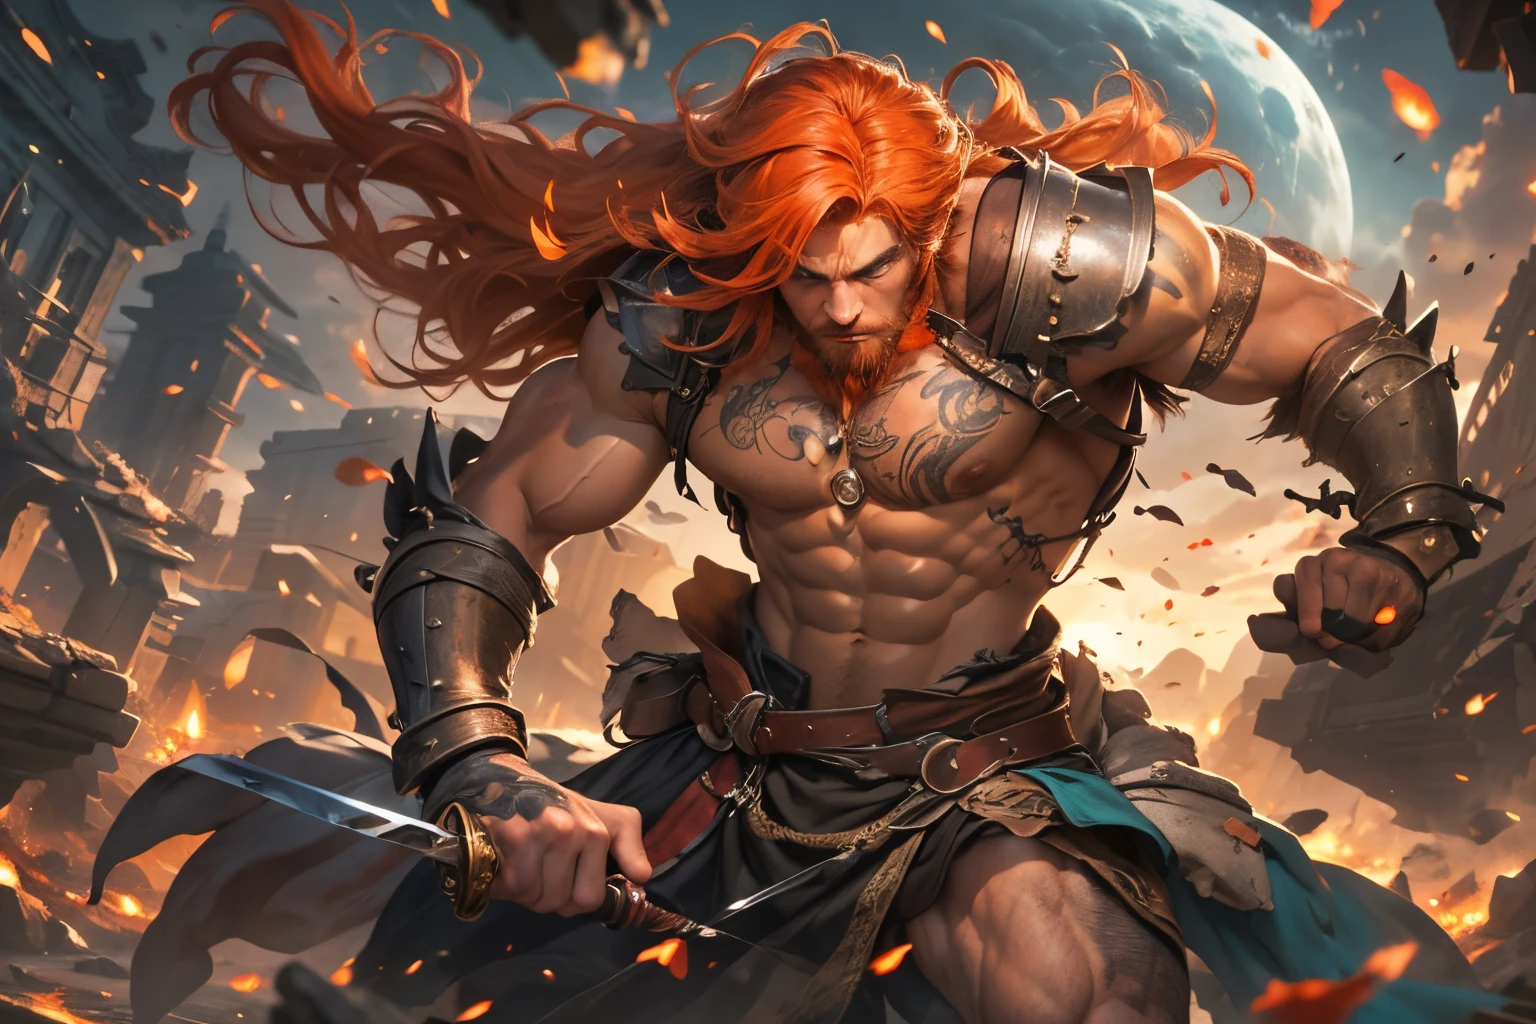 male, muscular, bodybuilder, (1 man with long red hair, stubble, blue eyes), (1 man with long black hair, stubble, grey eyes), wearing loincloth, shirtless, wearing jewel encrusted harness for weapons, (tattoos), (stubble), gold ornaments, grim expression, warriors in battle in ruins of a stone temple, sword, cuts, blood, in a rust colored desert, two moons, orange sky, bokeh, raytracing, realistic textured skin, particle effects, depth of field, beautiful figure painting, bright light, amazing composition, HDR, volumetric lighting, ultra quality, elegant, highly detailed, masterpiece, best quality, high resolution,